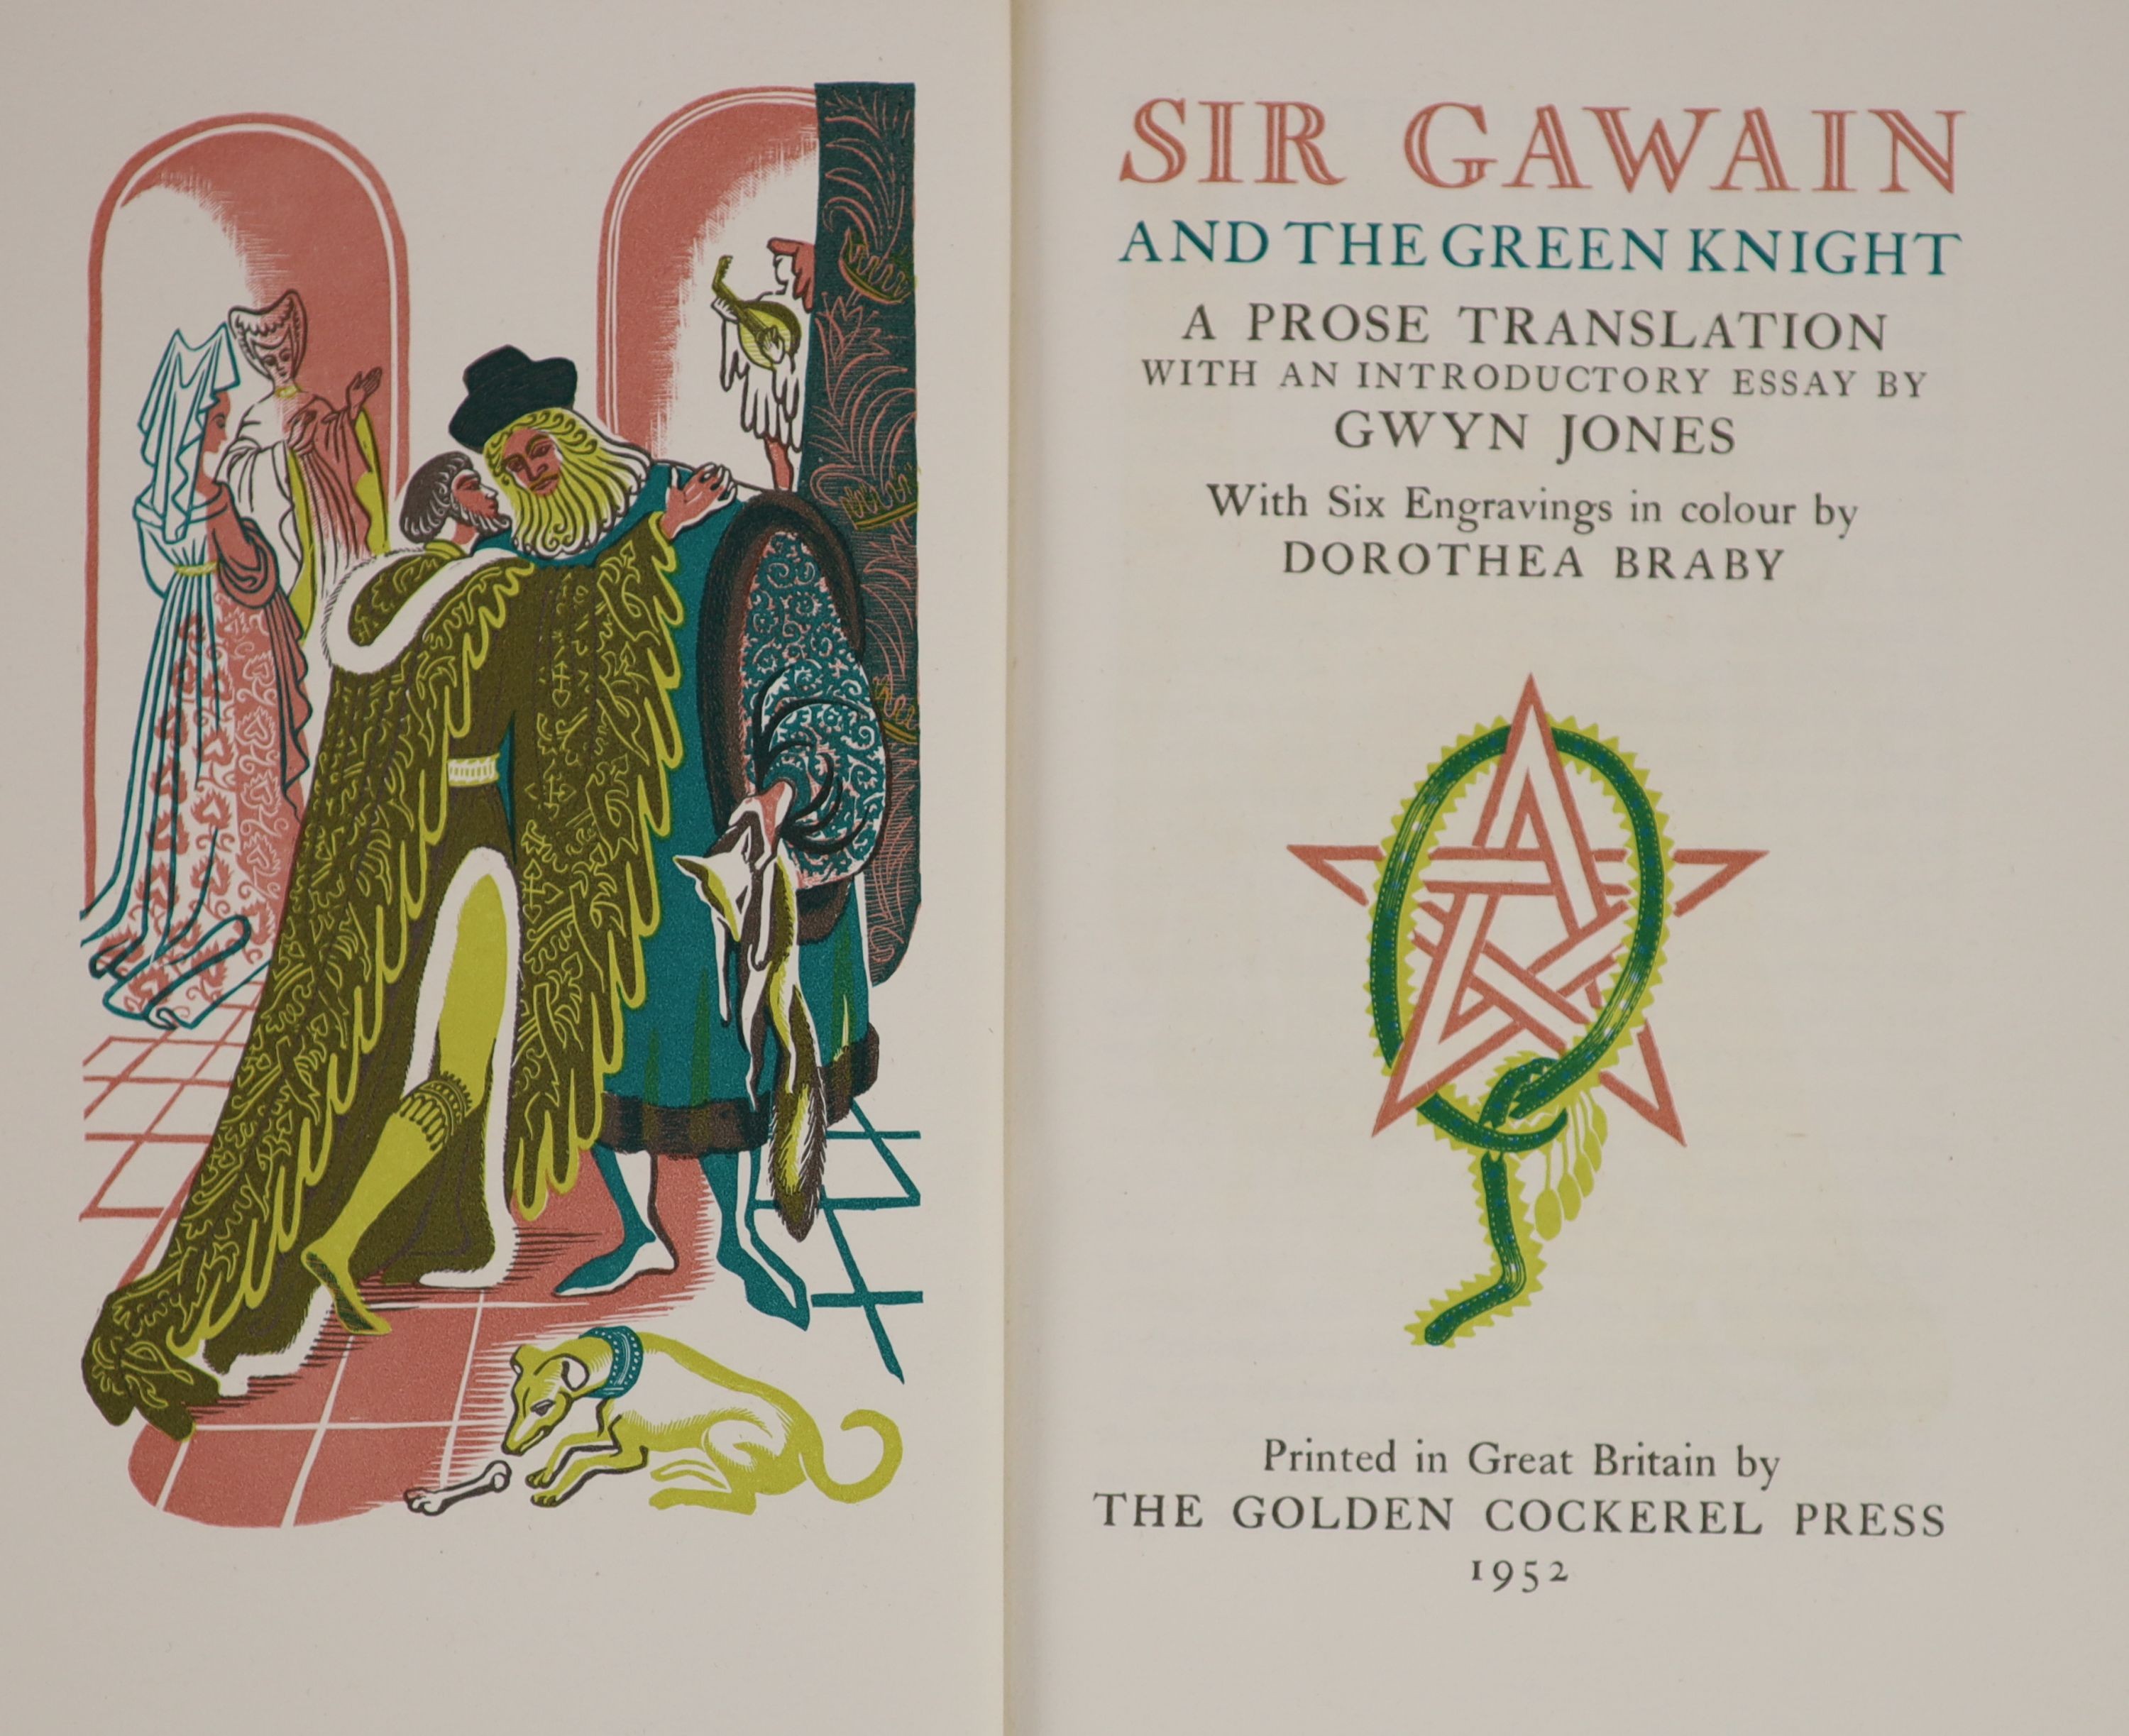 Golden Cockerel Press - Waltham Saint Lawrence, Berkshire - Sir Gawain and the Green Knight, one of 360, translated by Gwyn Jones, illustrated with 6 engravings by Dorothea Brady, original cloth, 1952